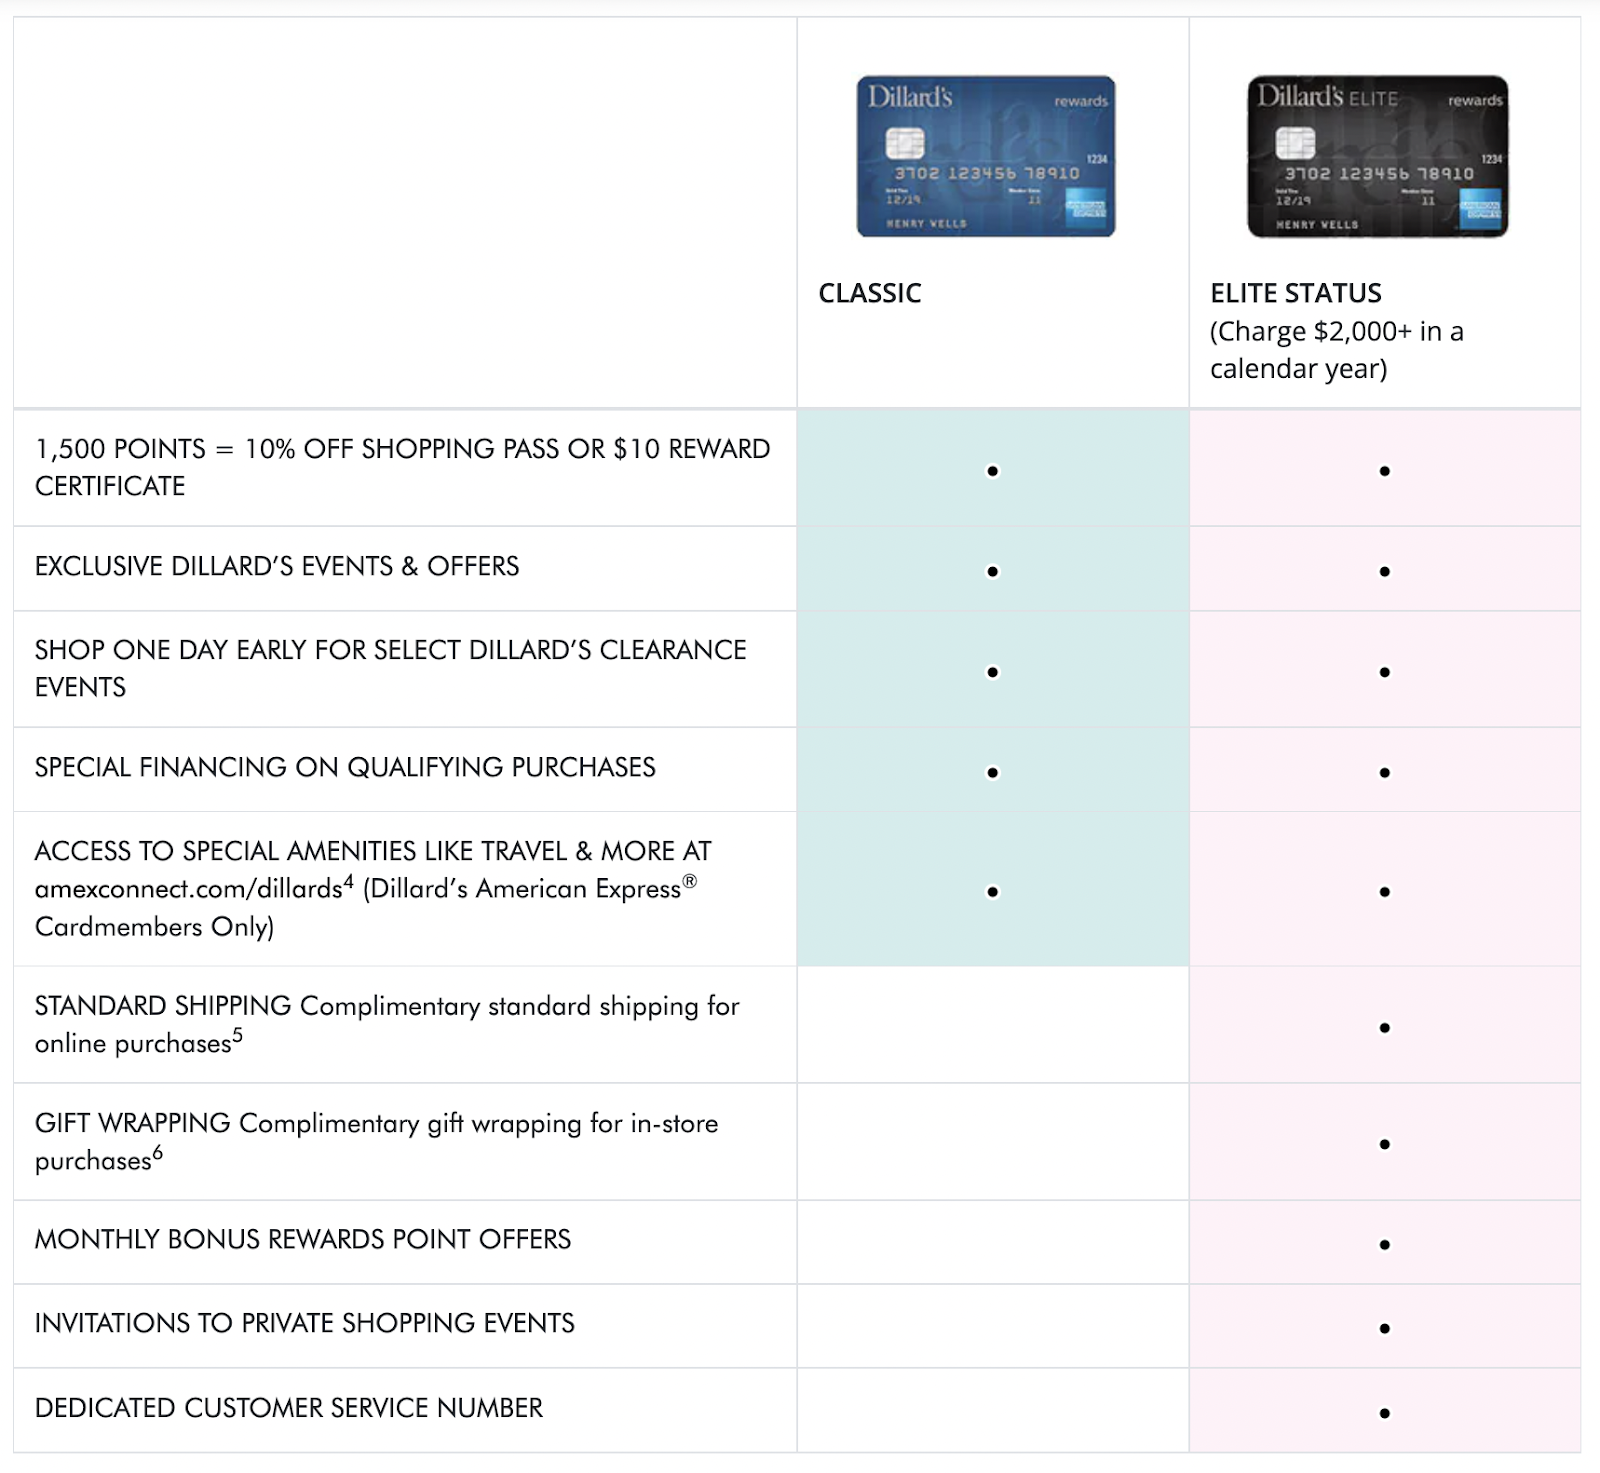 Why Large Rewards Program Fail–A screenshot of Dillard’s rewards credit card rewards program tiers: Classic and Elite Status. The image shows a chart of various rewards and which are available per tier.